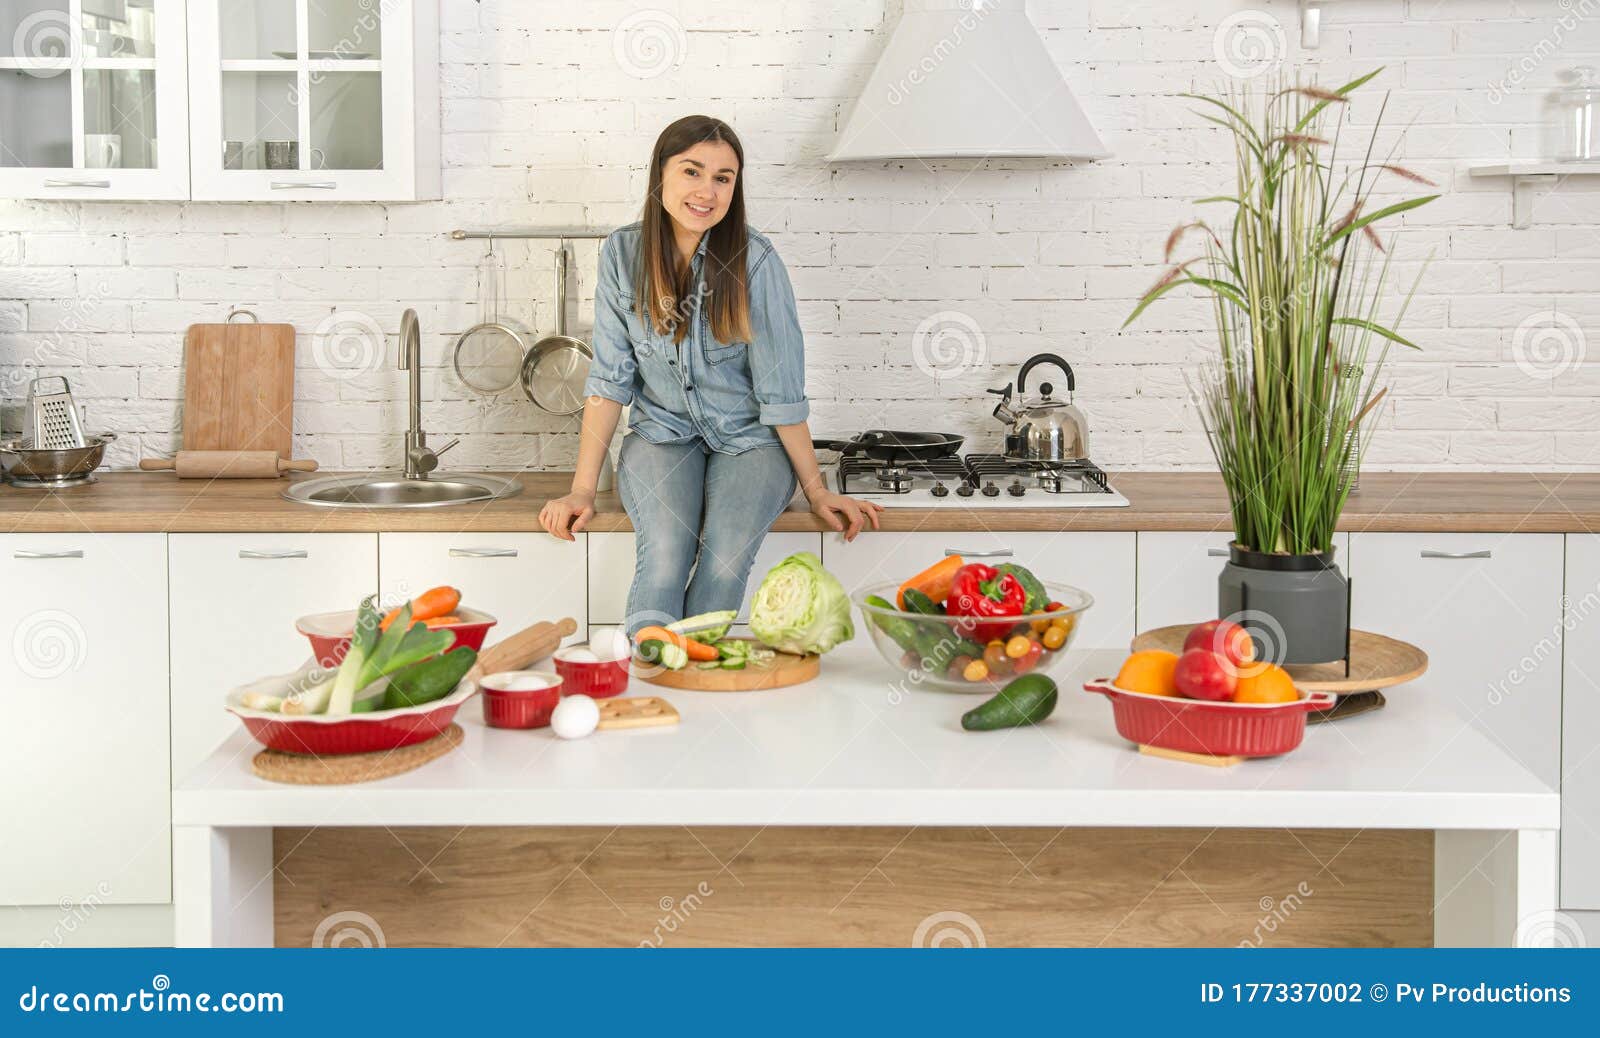 A Young Woman Is Sitting On The Kitchen Table With Vegetables And